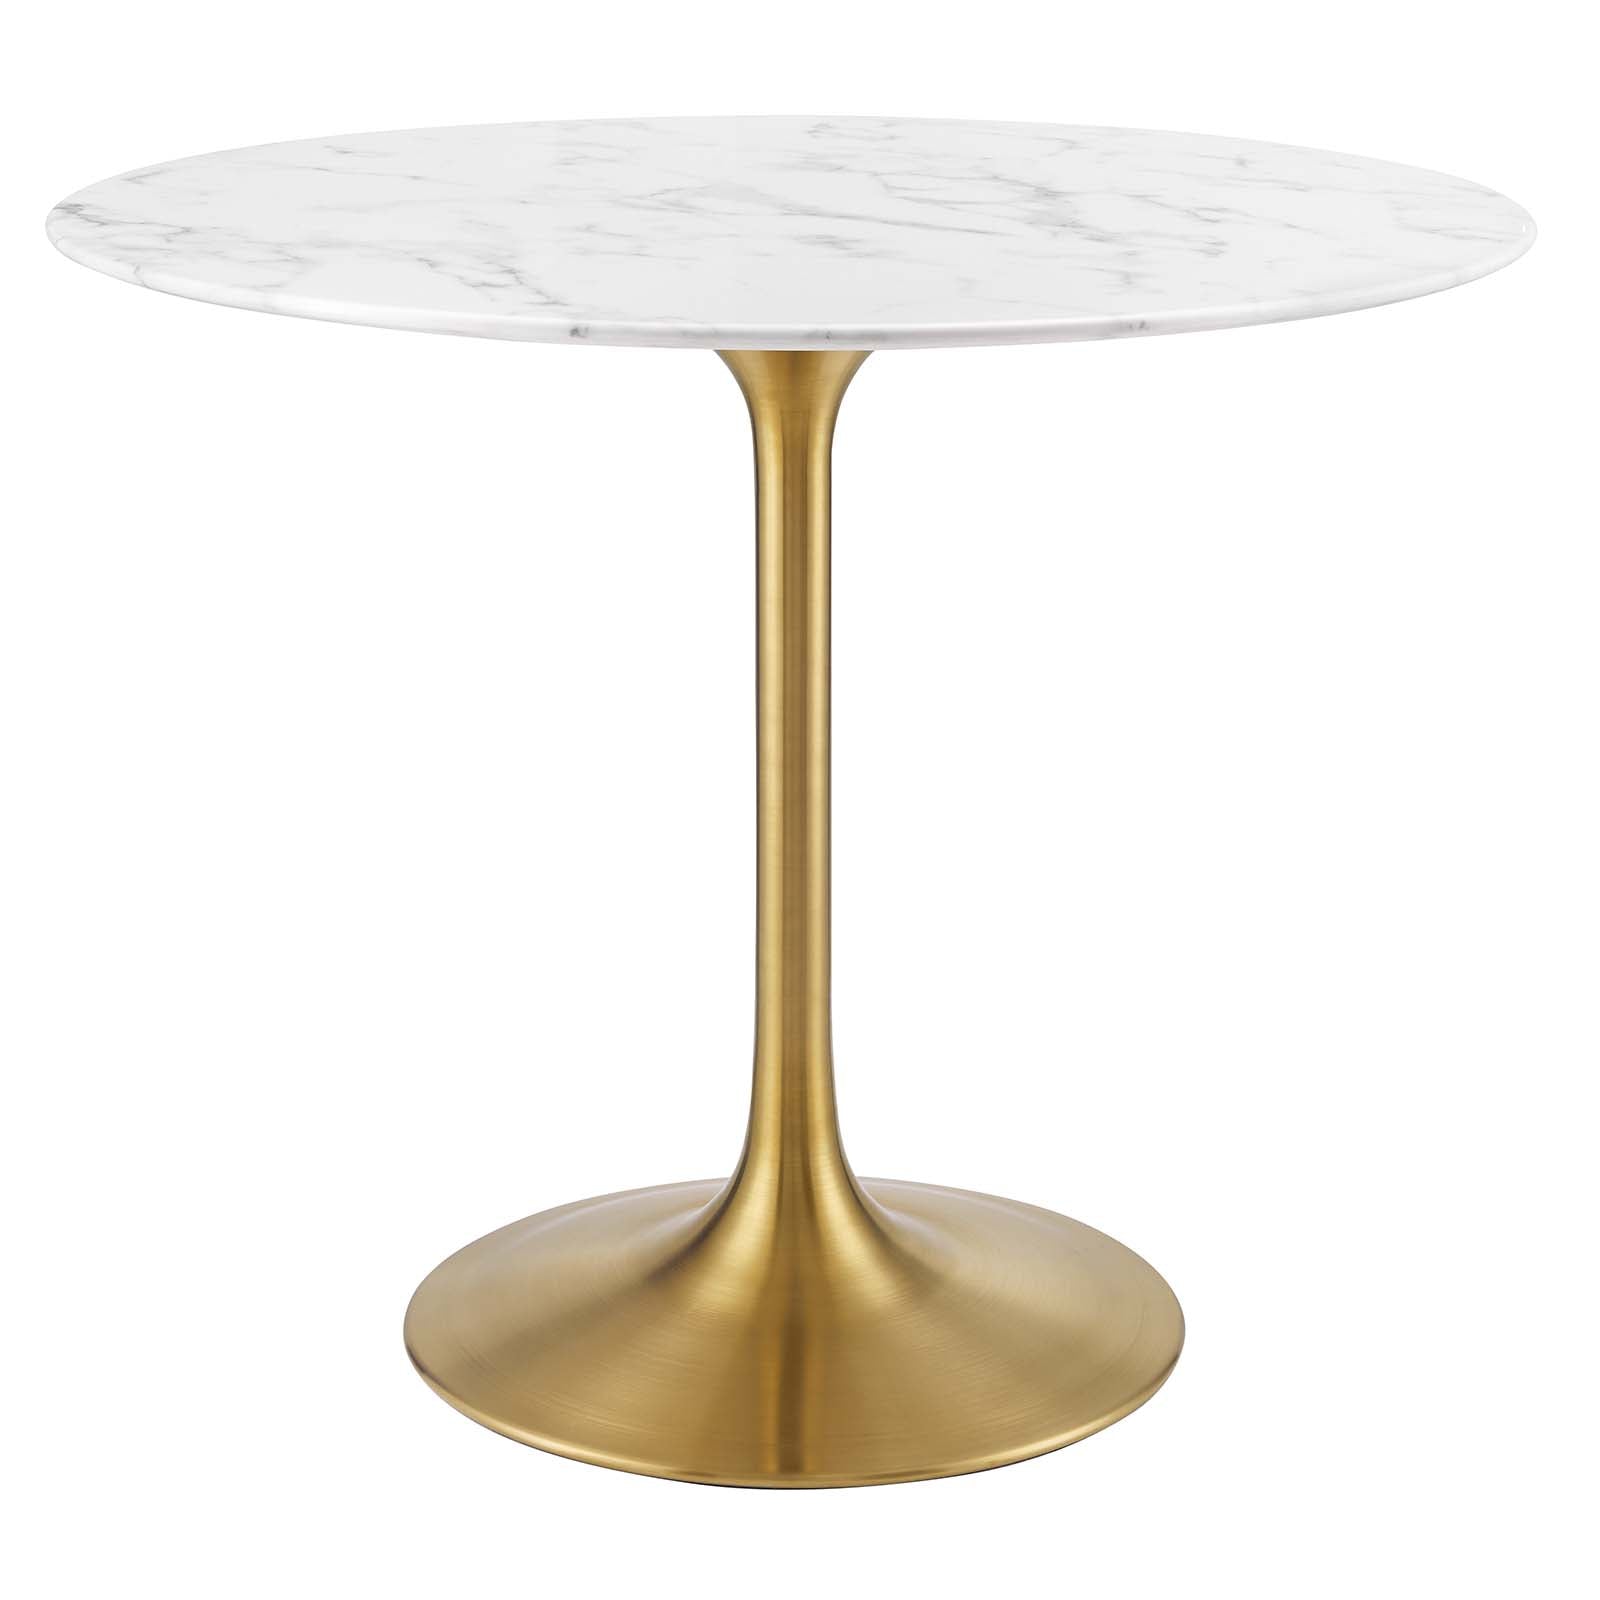 Lippa 36" Round Artificial Marble Dining Table